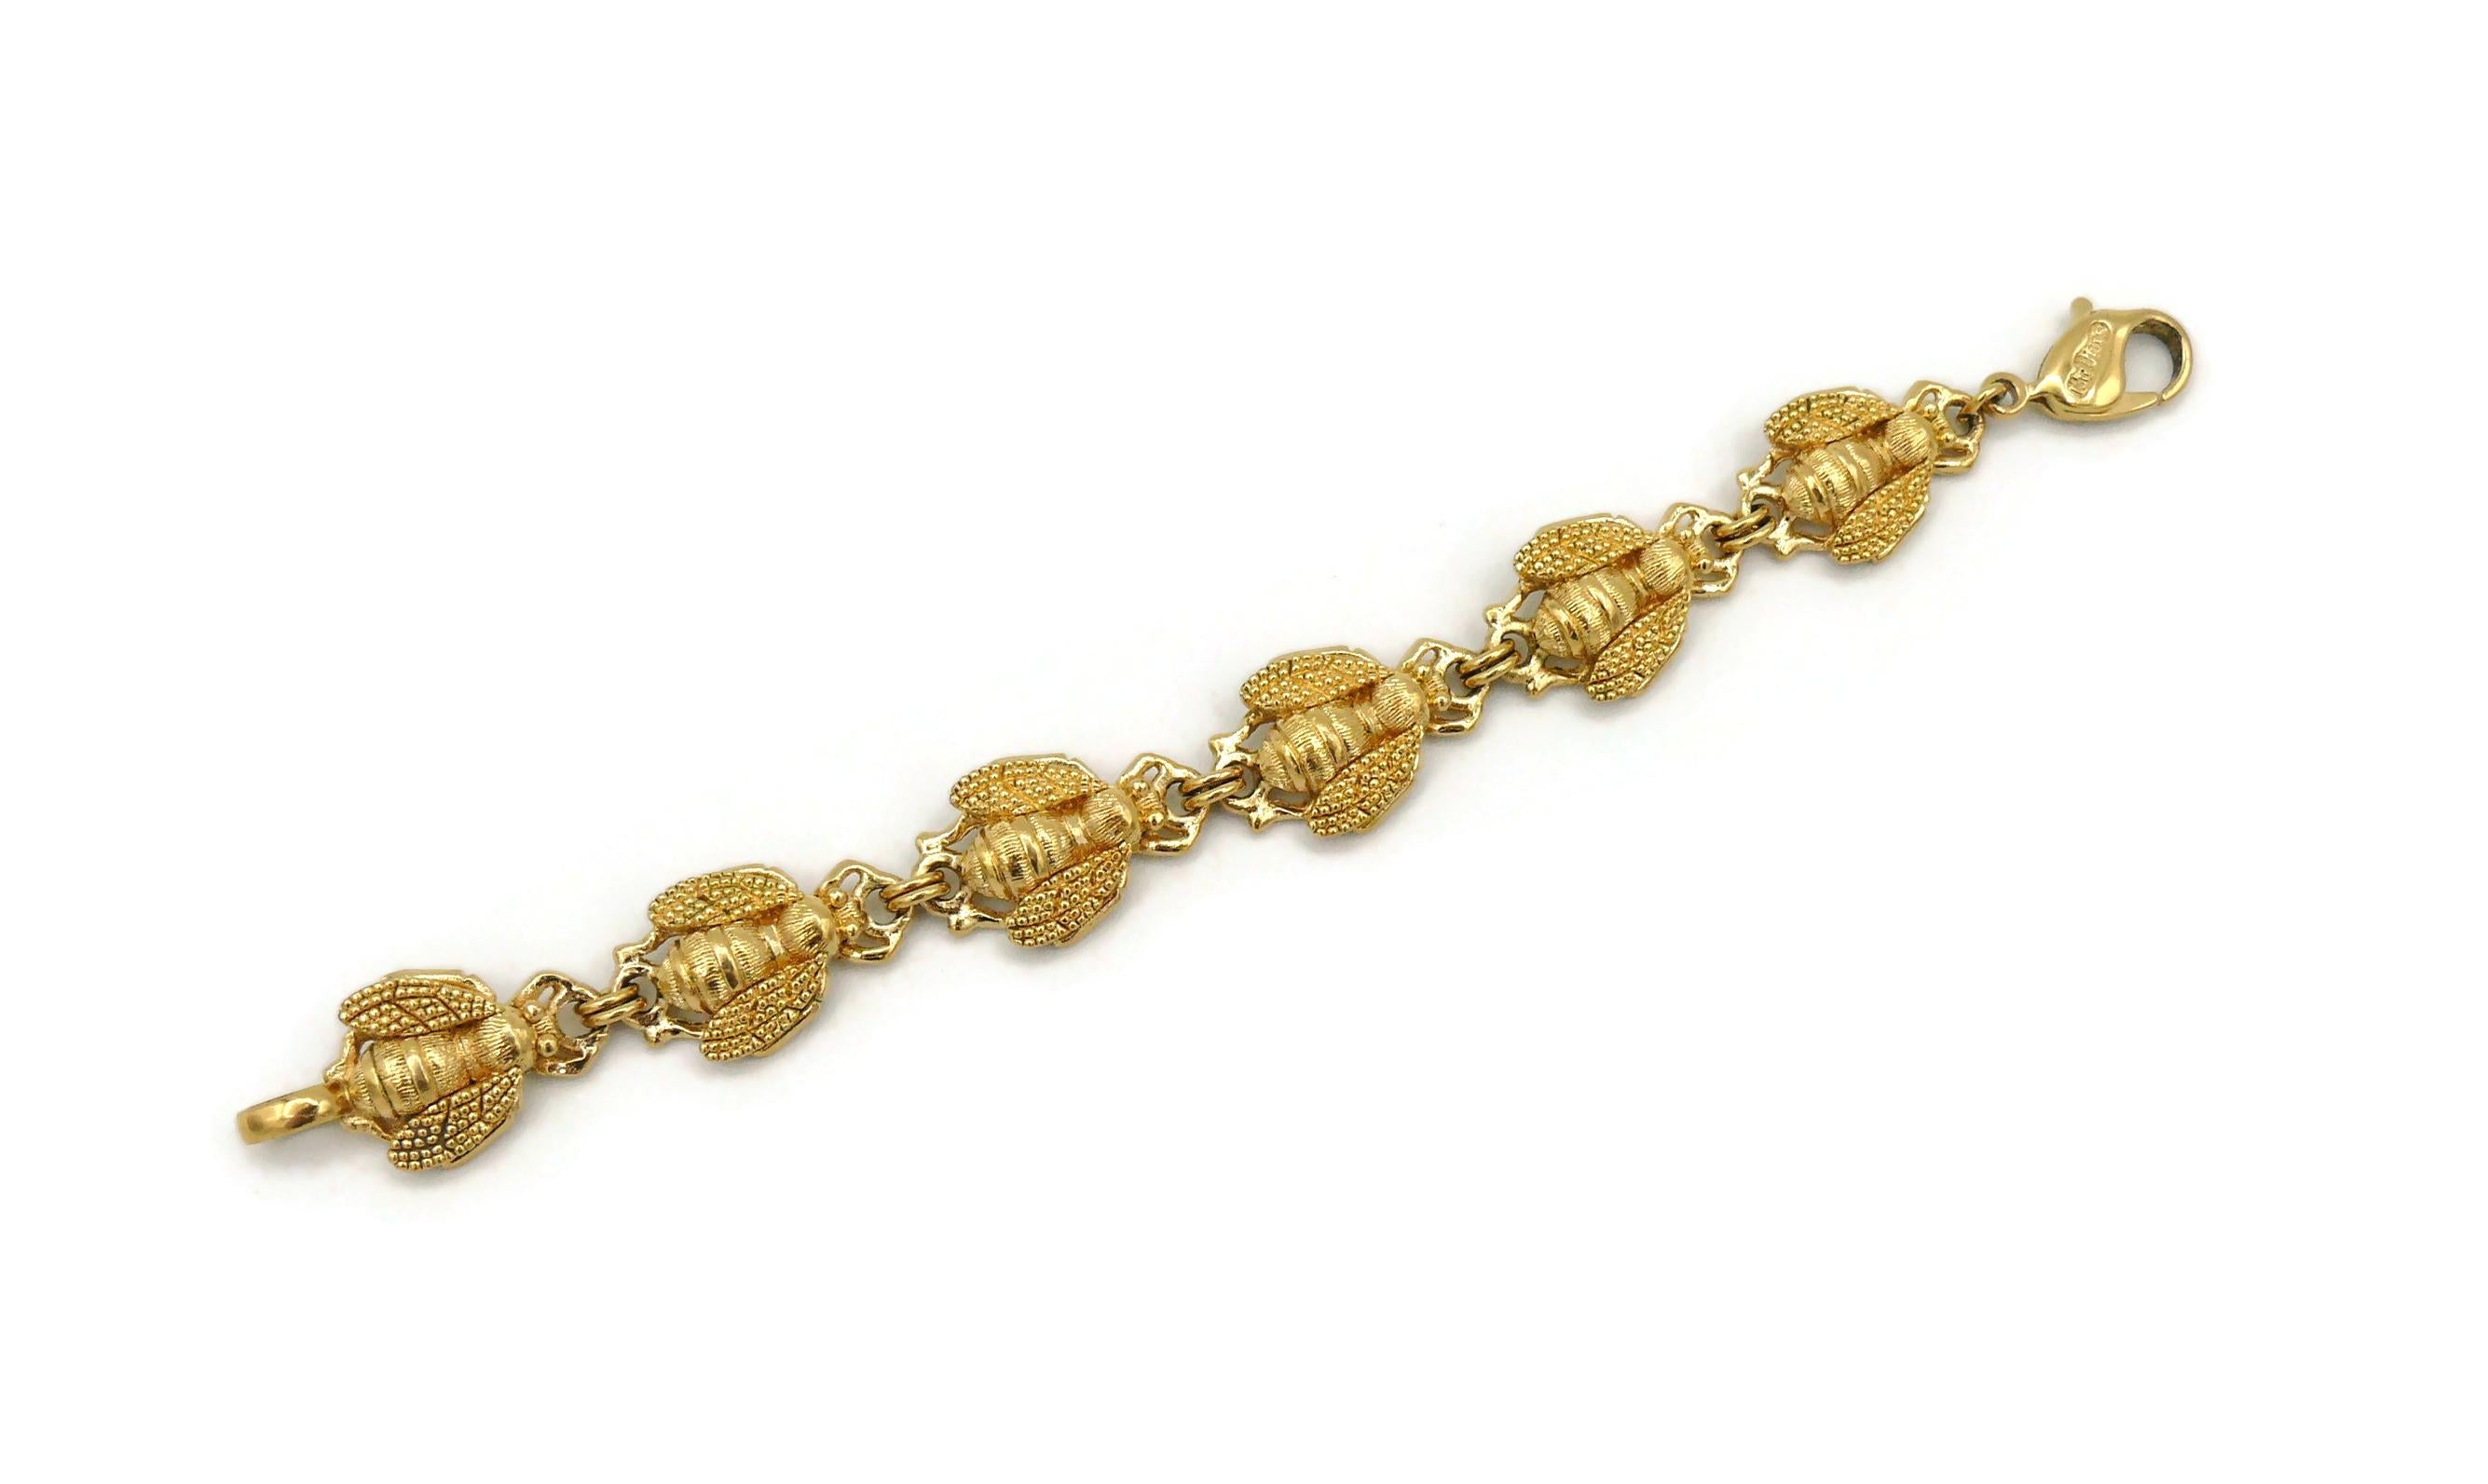 CHRISTIAN DIOR vintage iconic gold toned bracelet featuring bee links.

Lobster clasp closure.

Embossed CHR. DIOR © and Germany.

Indicative measurements : length approx. 16.3 cm (6.42 inches) / max. width approx. 1.3 cm (0.51 inch).

NOTES
- This